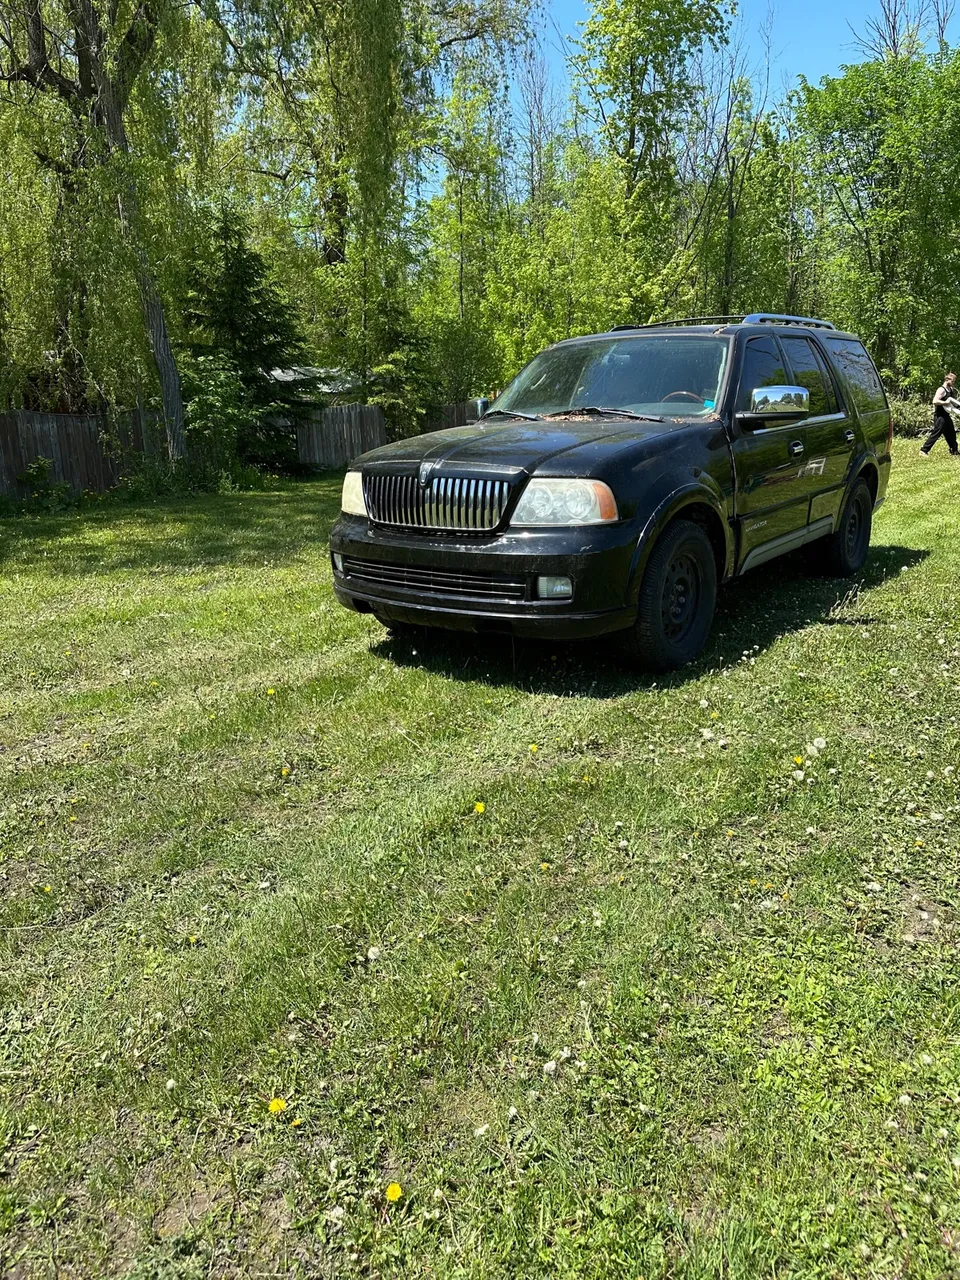 2006 Lincoln Navigator parts or whole